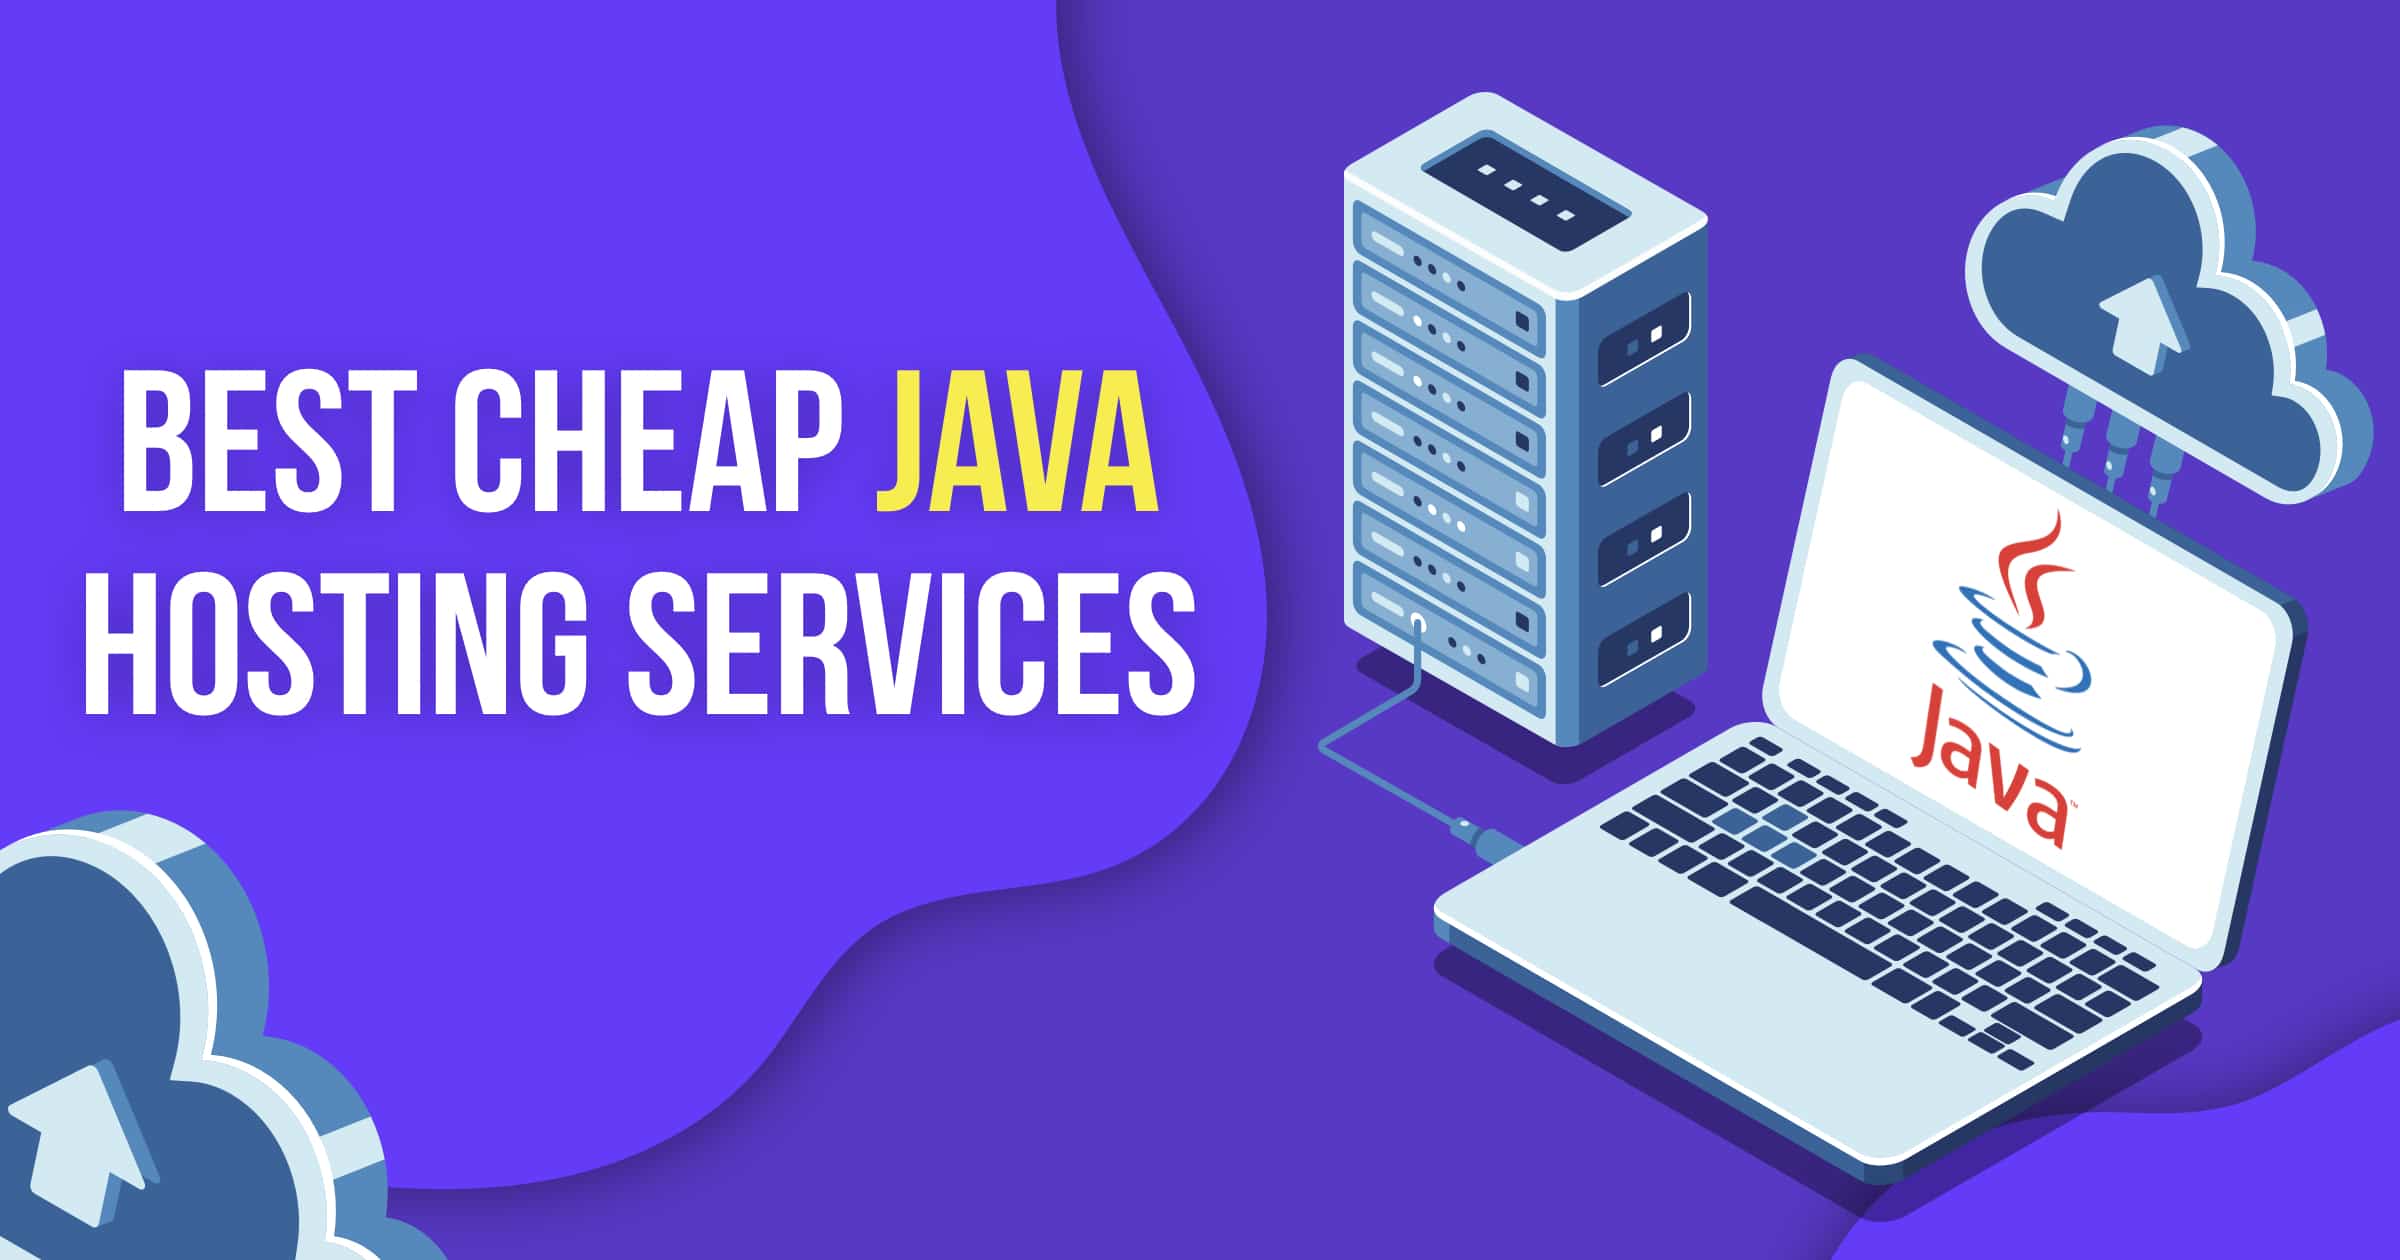 5 Best Cheap Yet Reliable Java Hosting Services In 2020 Images, Photos, Reviews